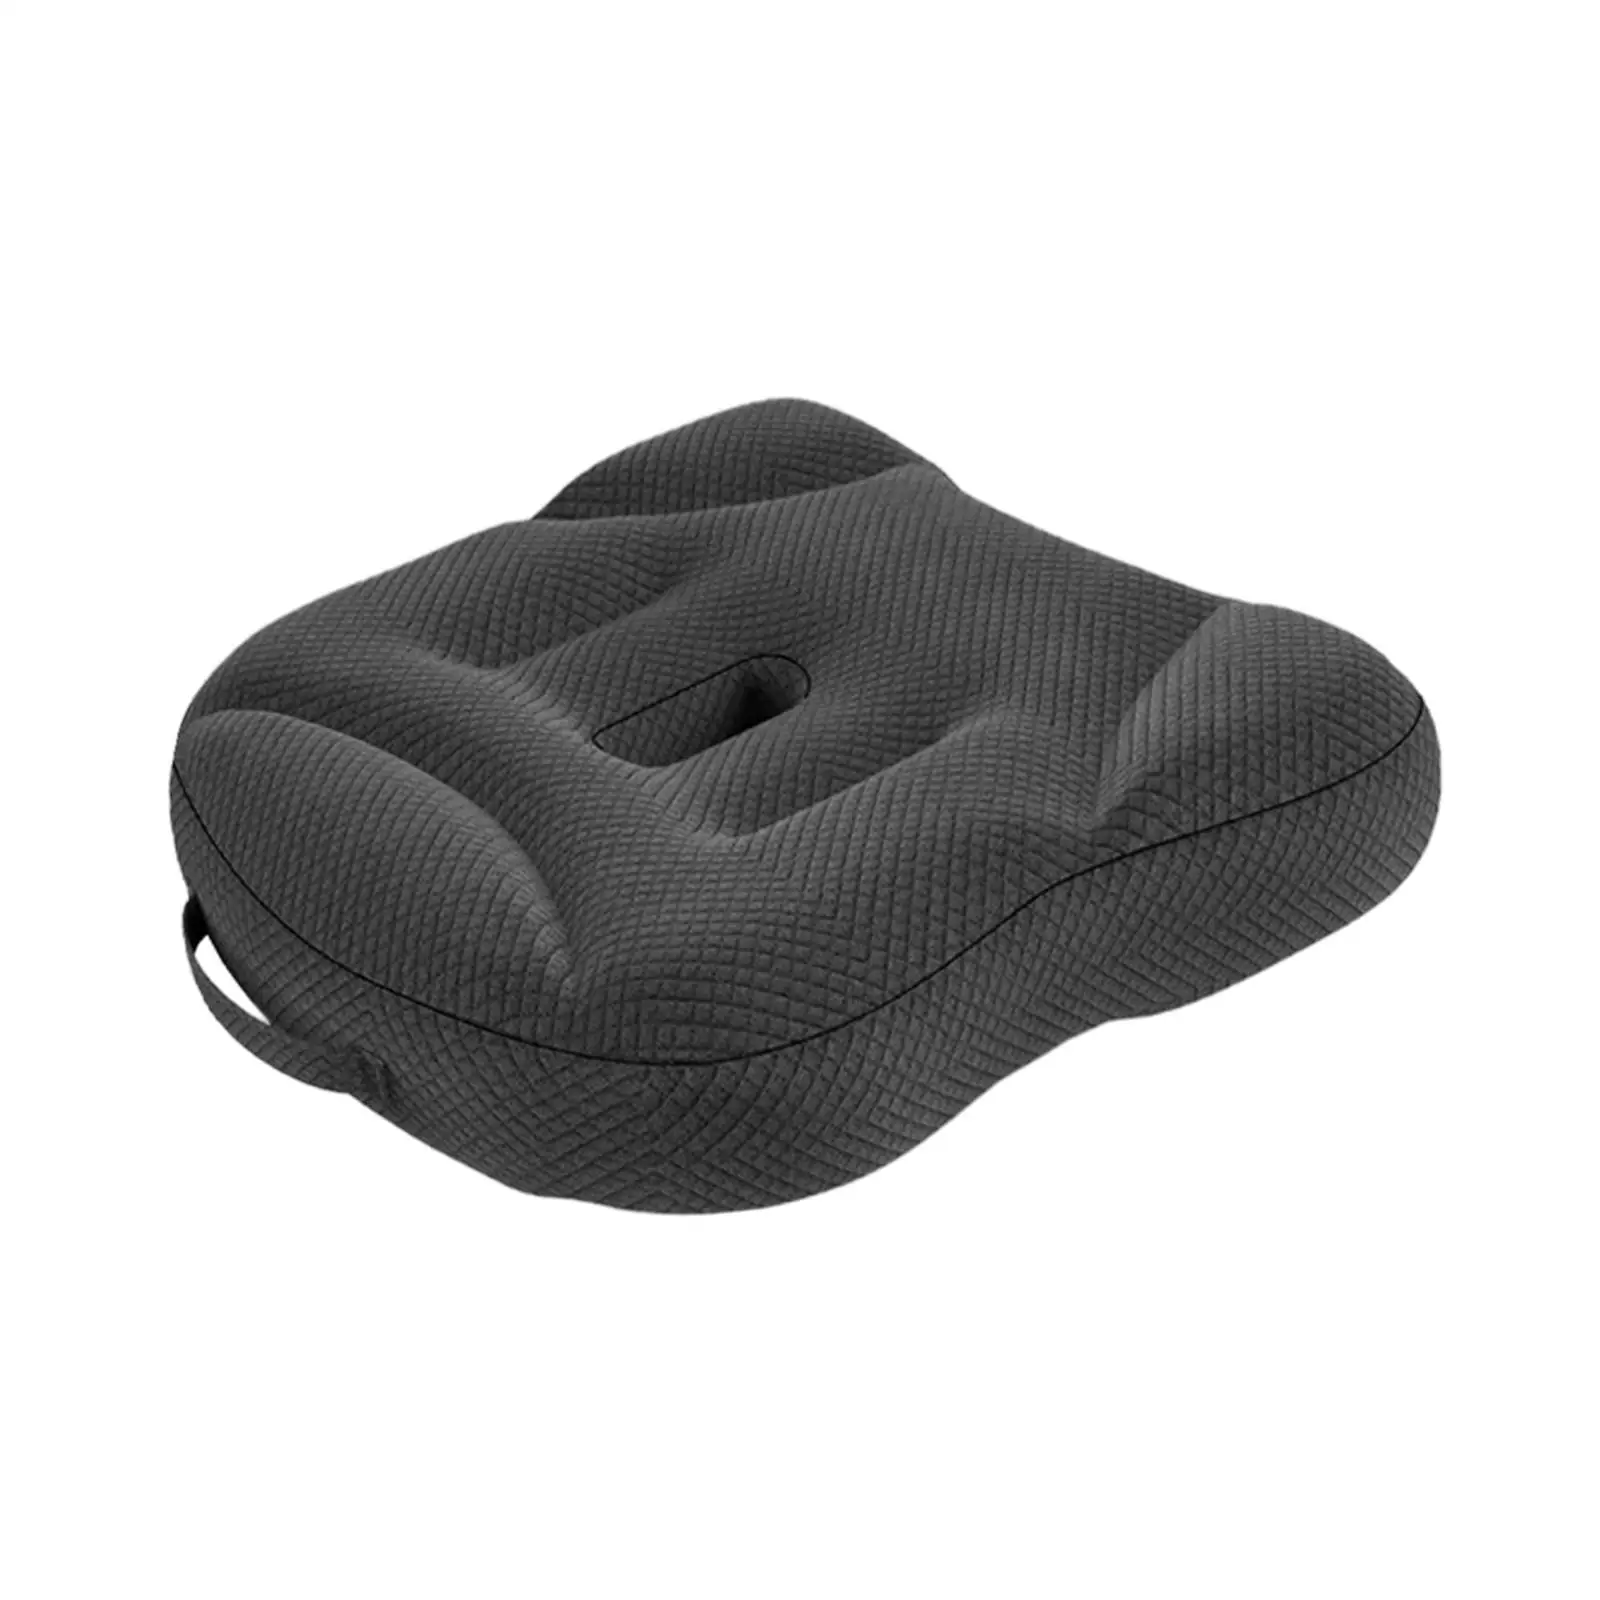 Seat Cushion Pillow for Office Desk Chair Cushion for Office Home Traveling